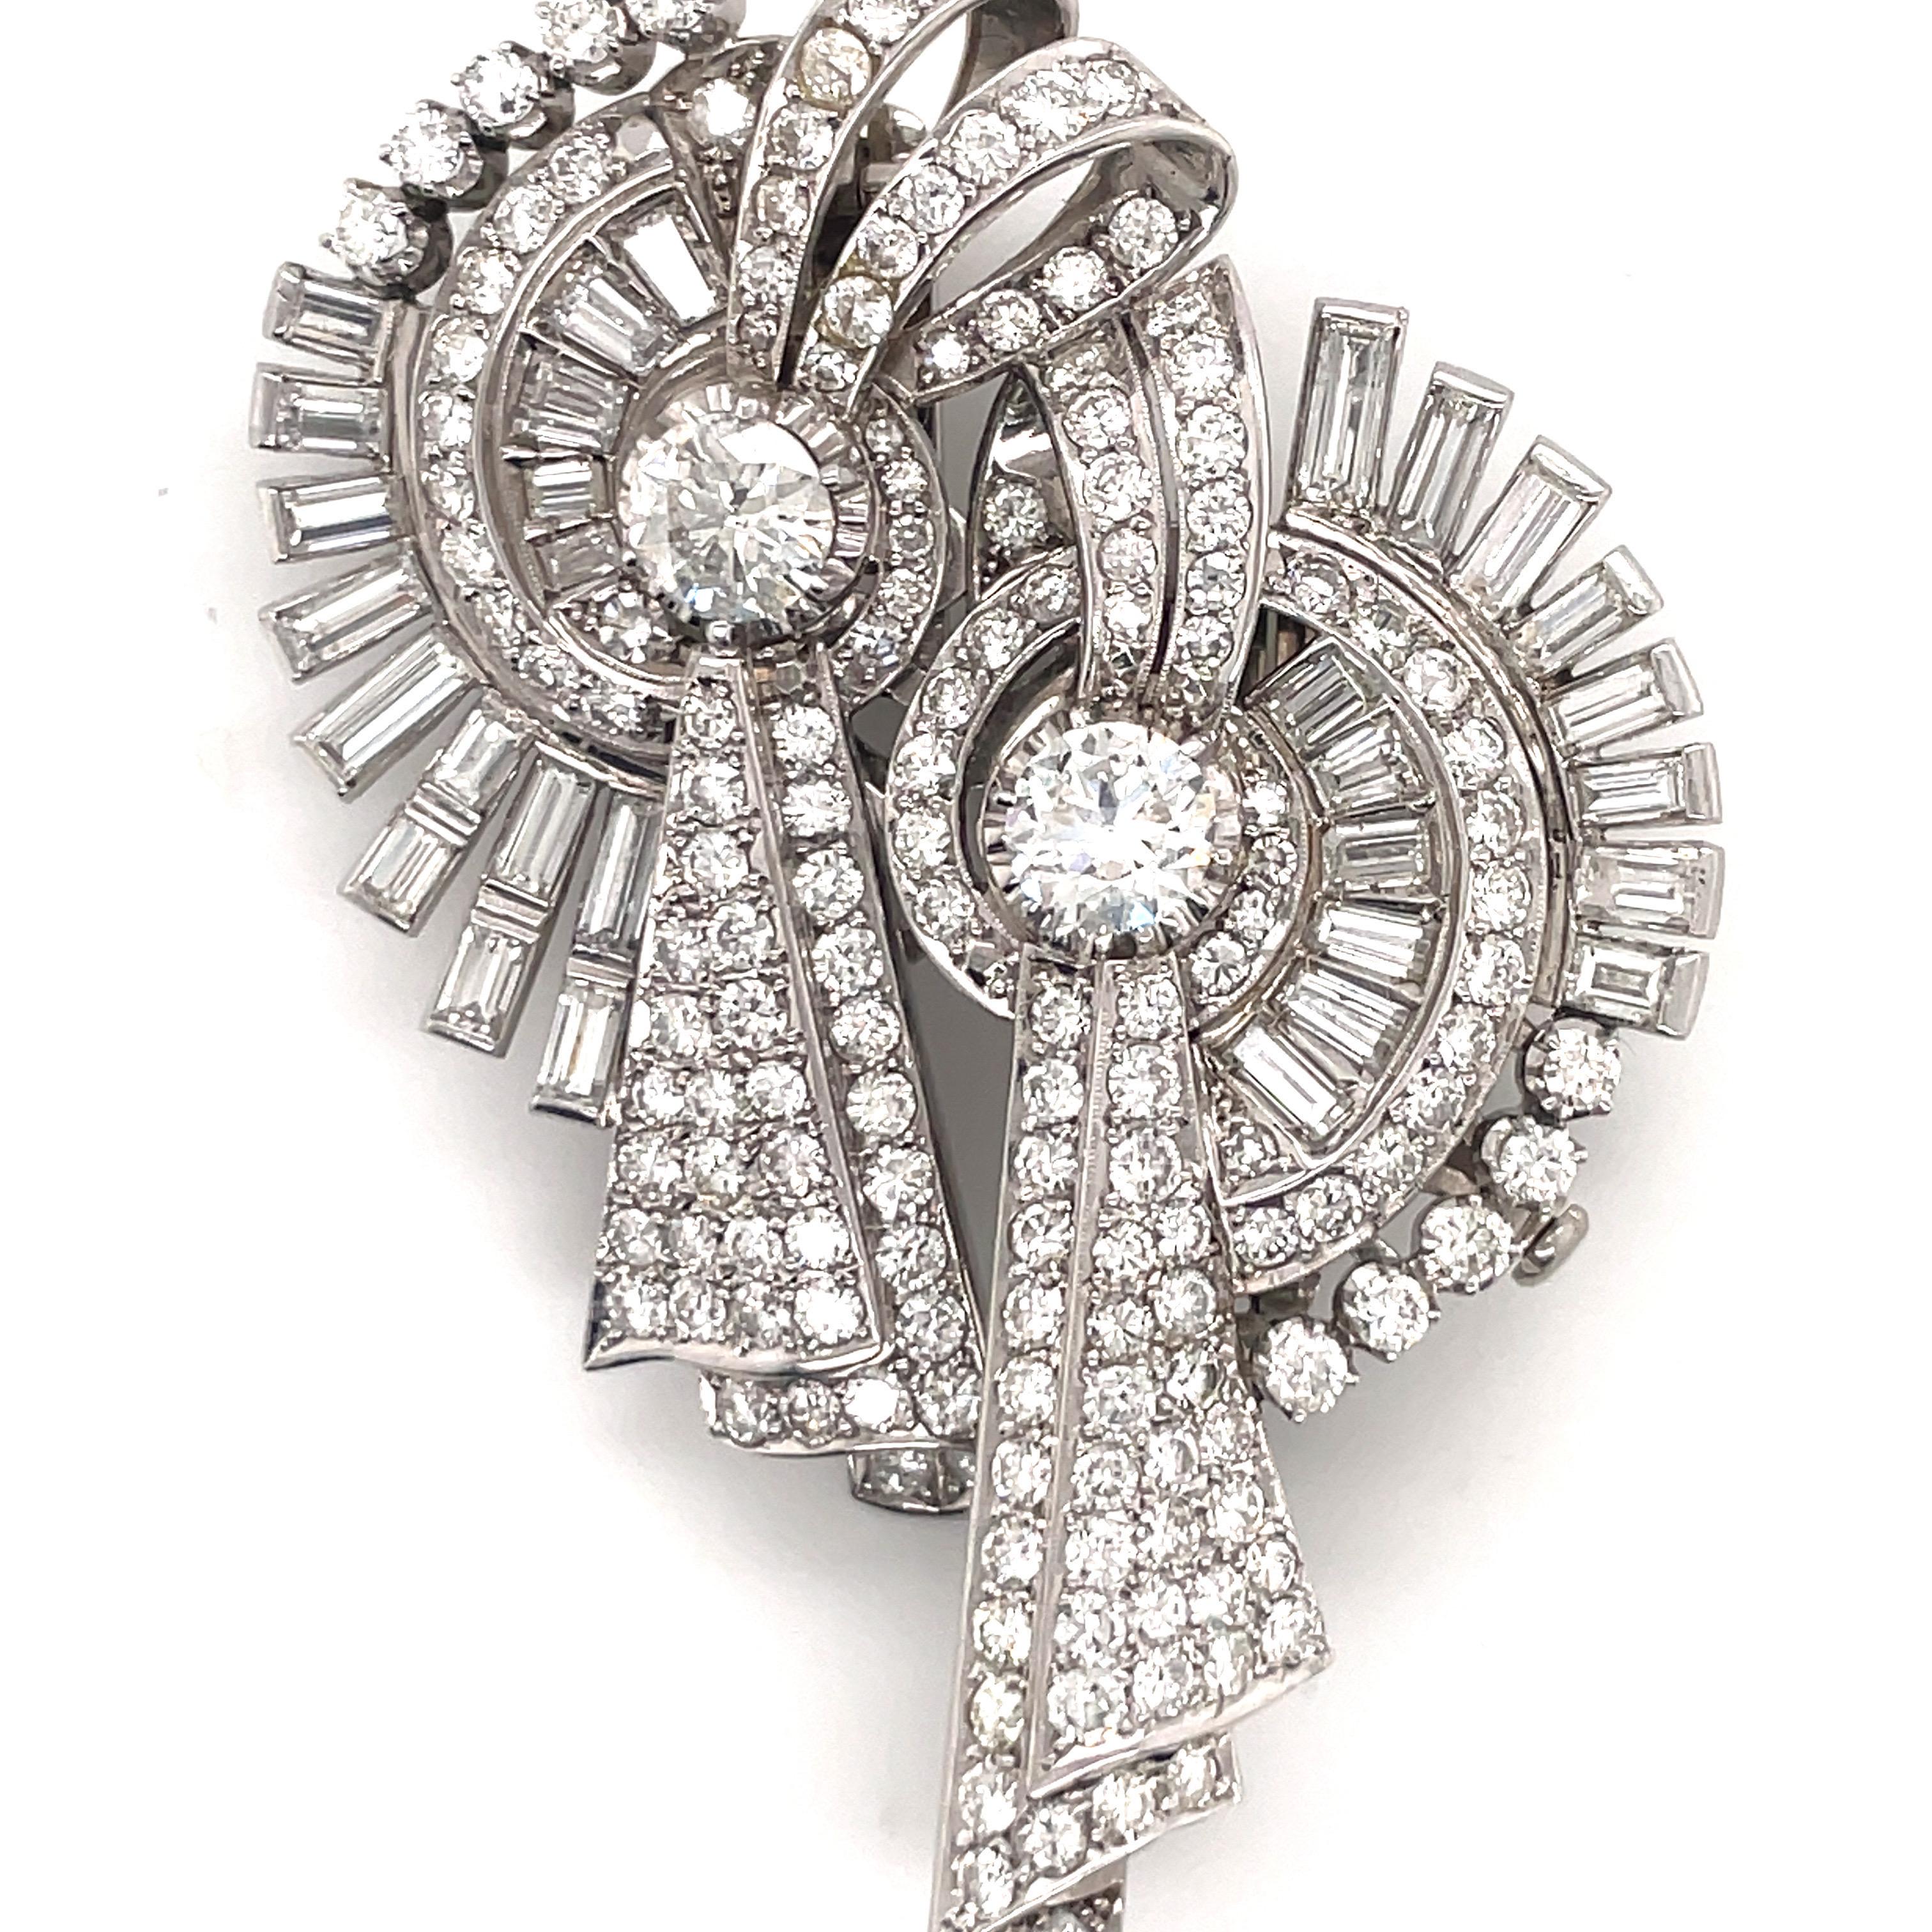 Circa 1920's this Art Deco double brooch features two center diamonds weighing approximately 2.20 carats total flanked with numerous diamonds weighing approximately 12 carats.
Can be worn together or as one. 